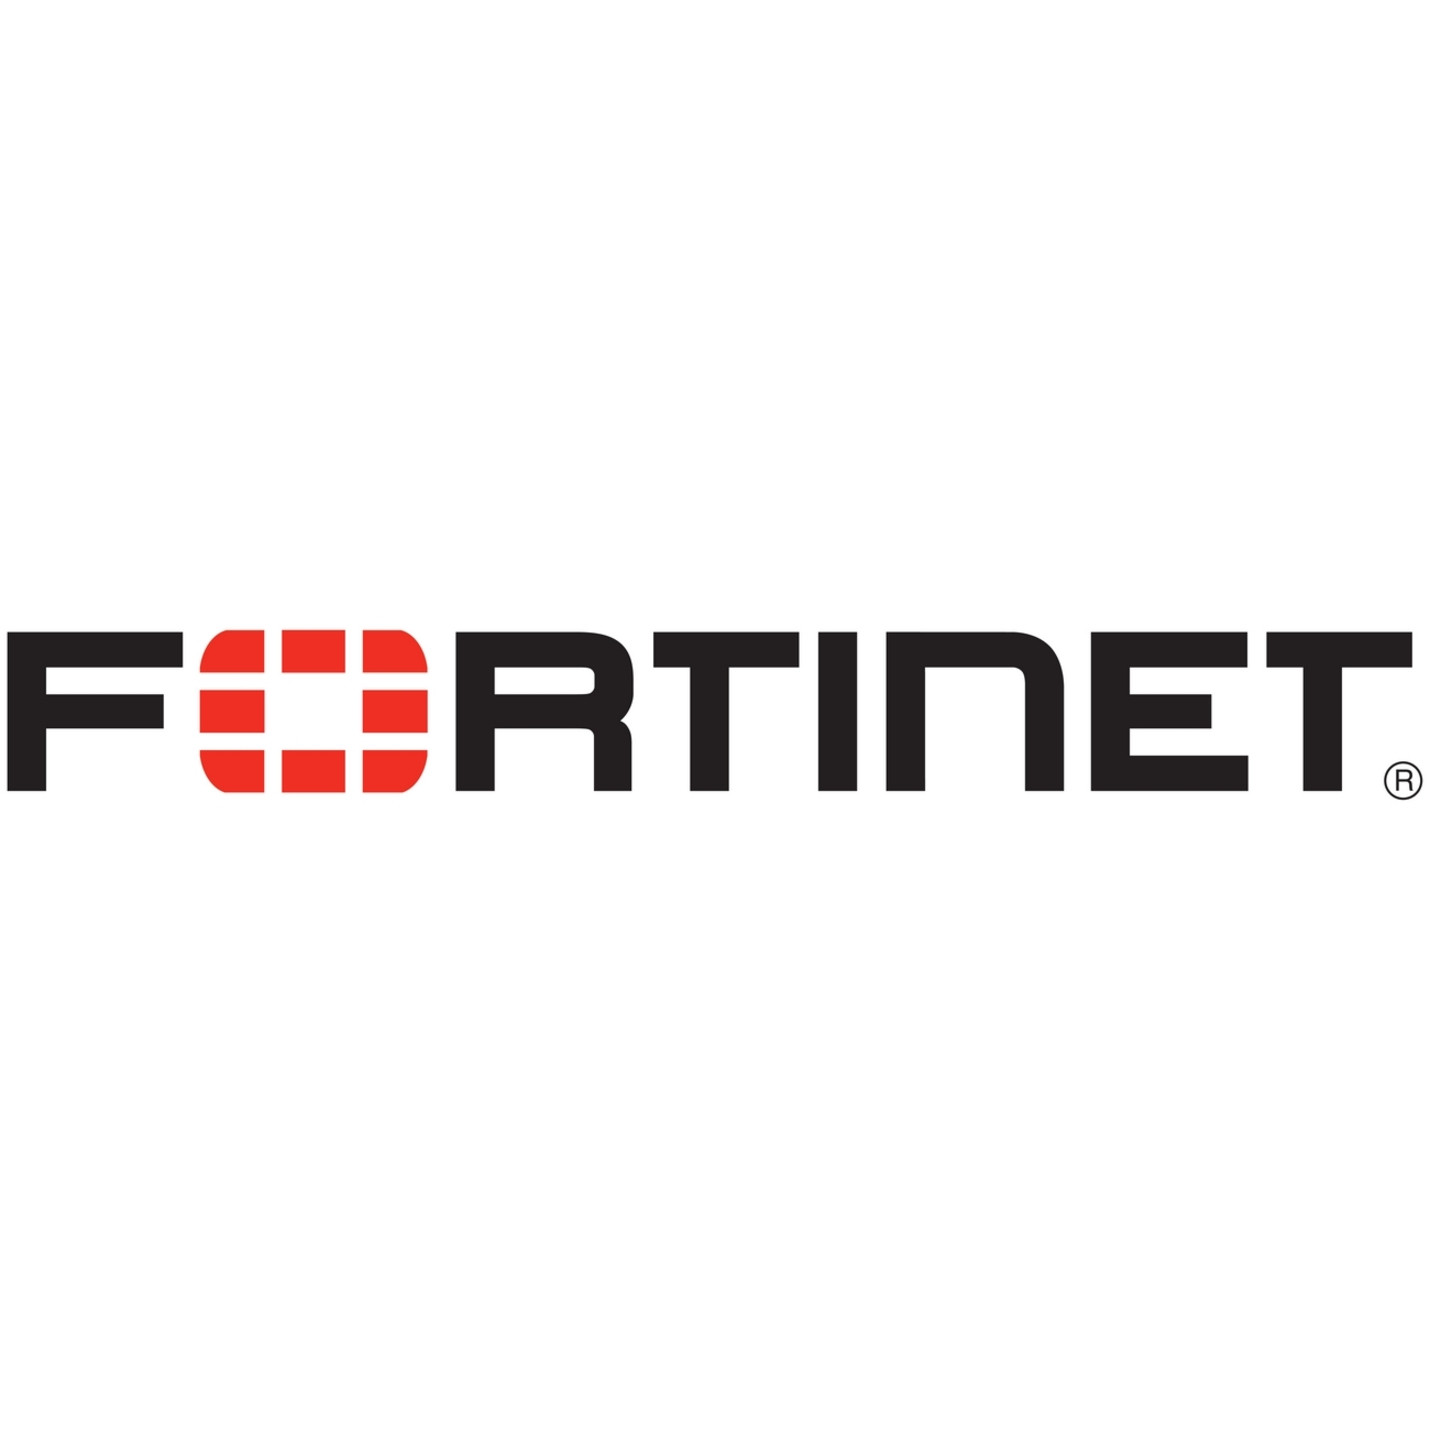 Fortinet AP1010i IEEE 802.11n 300 Mbit/s Wireless Access Point2.40 GHz, 5 GHzMIMO Technology1 x Network (RJ-45)Ethernet, Fast Ethern… AP1010I